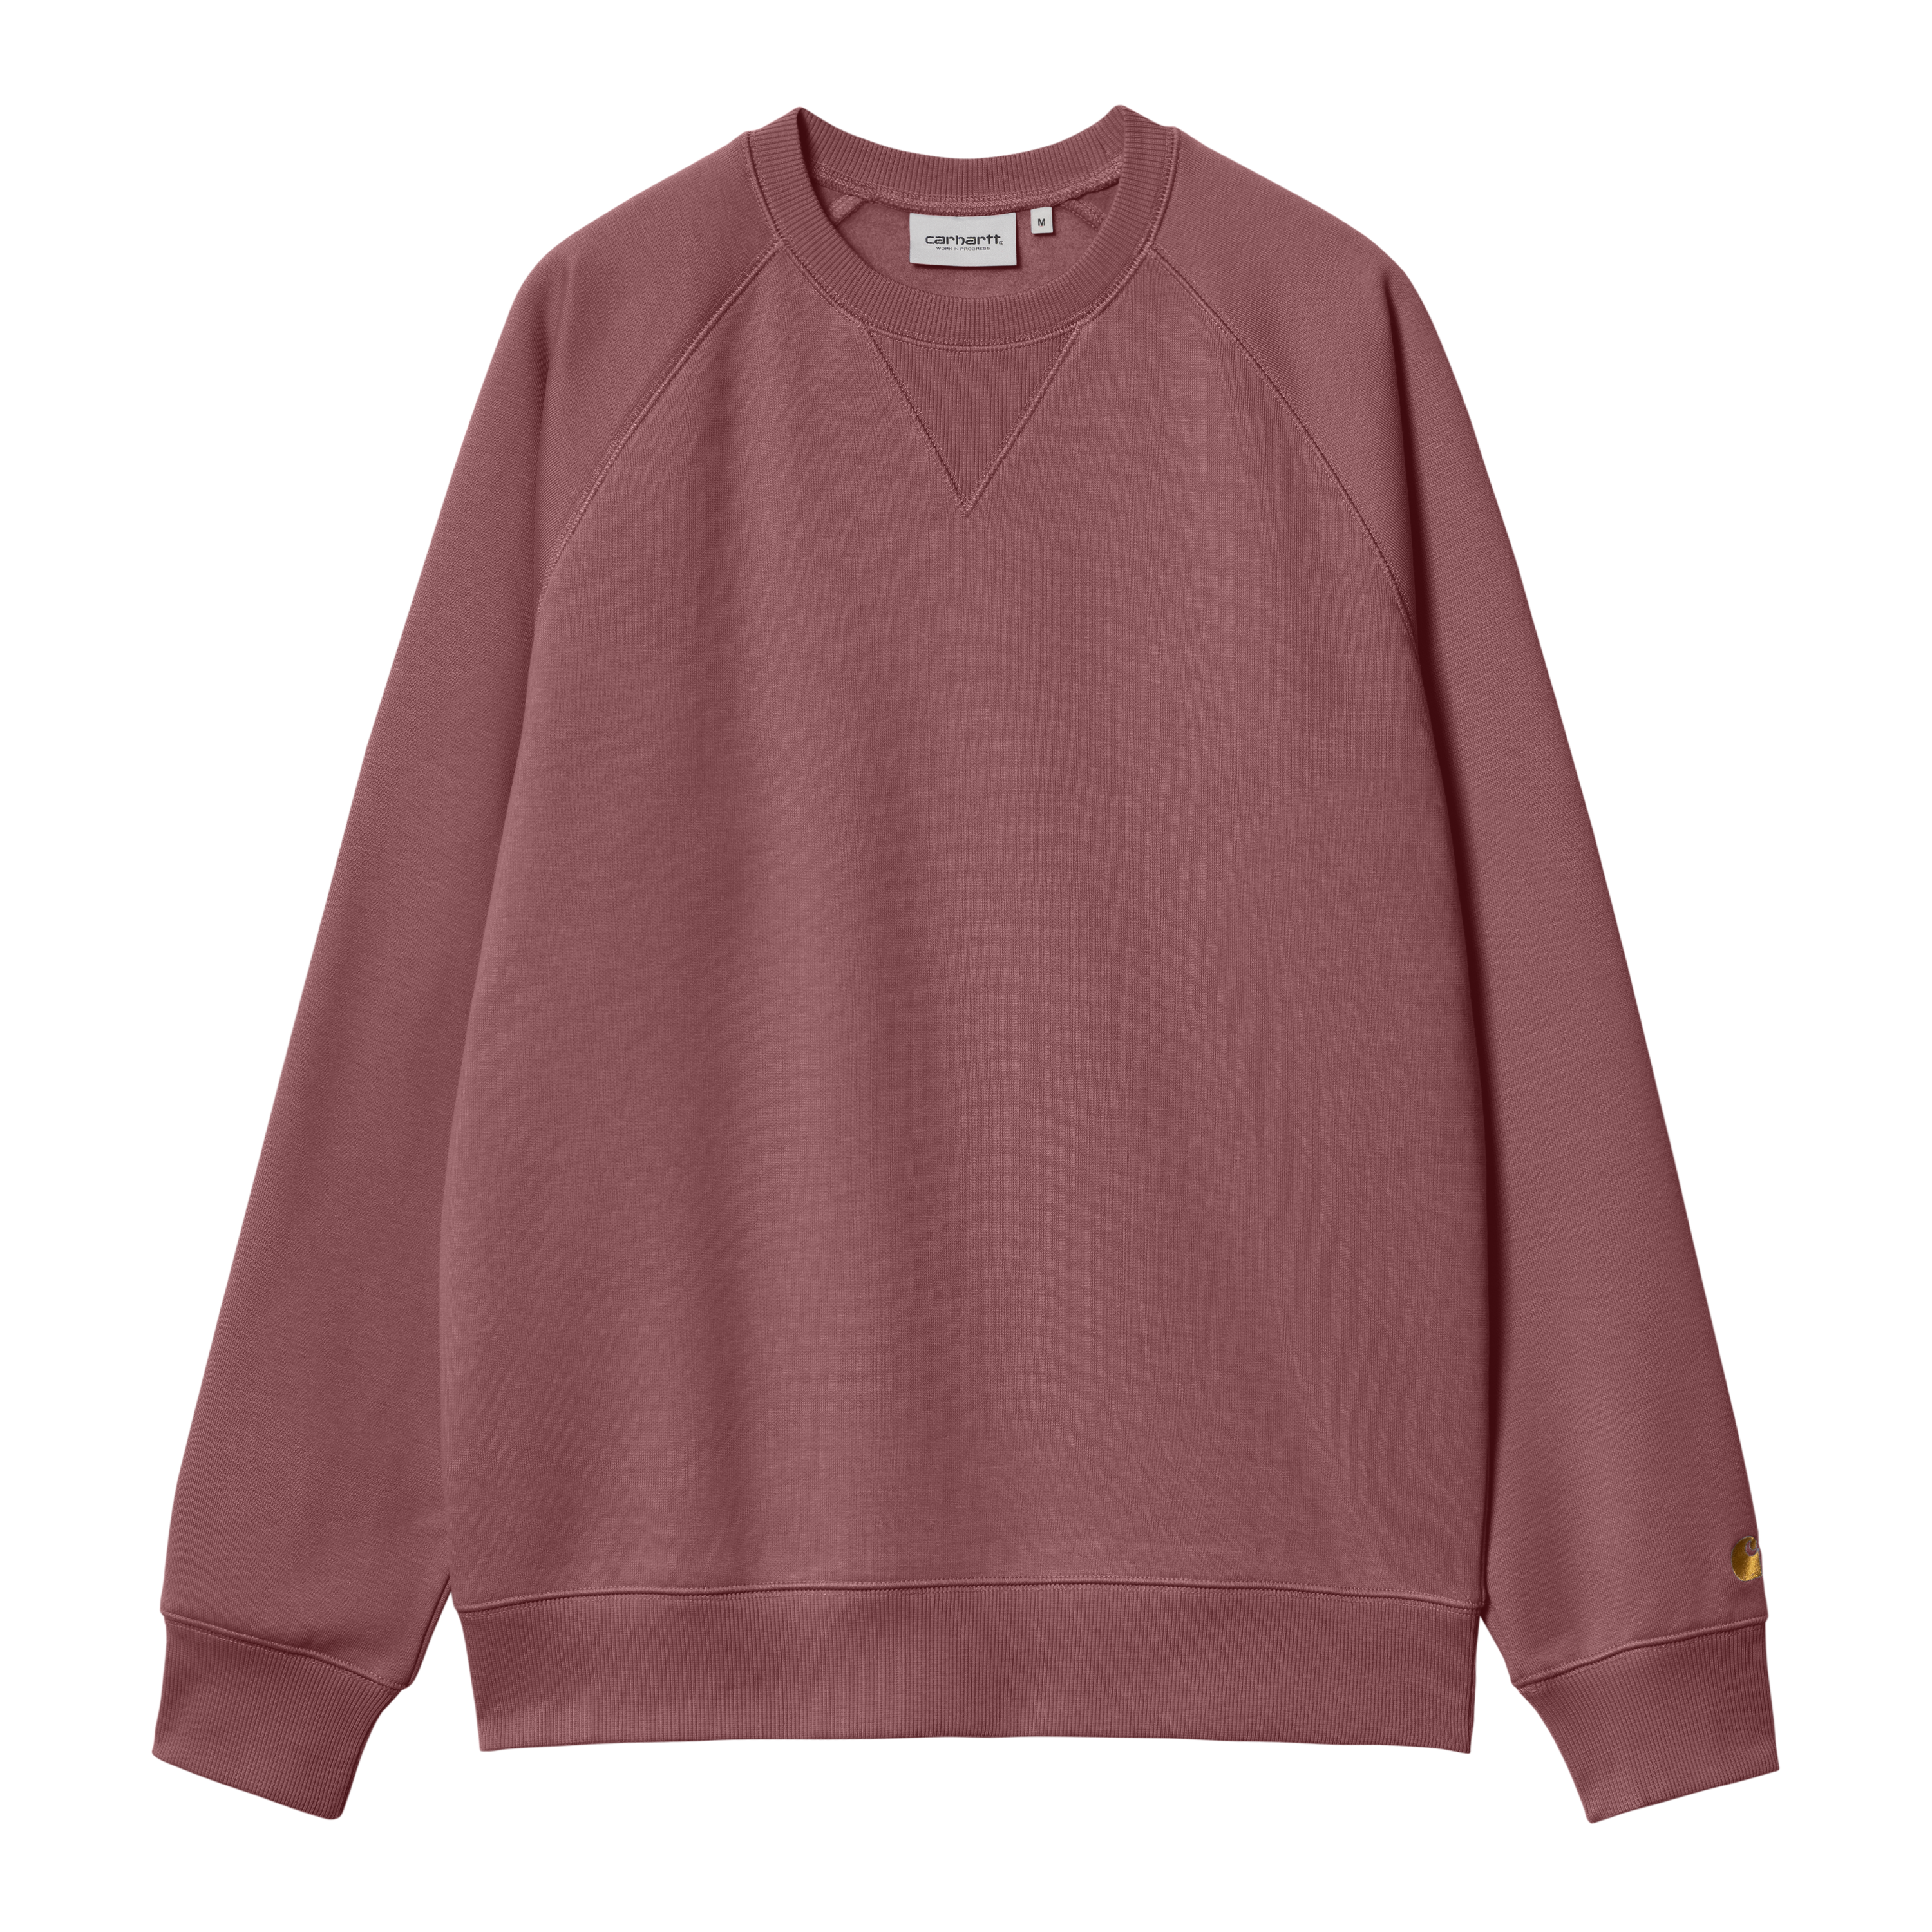 Carhartt WIP Chase Sweat in Rosa